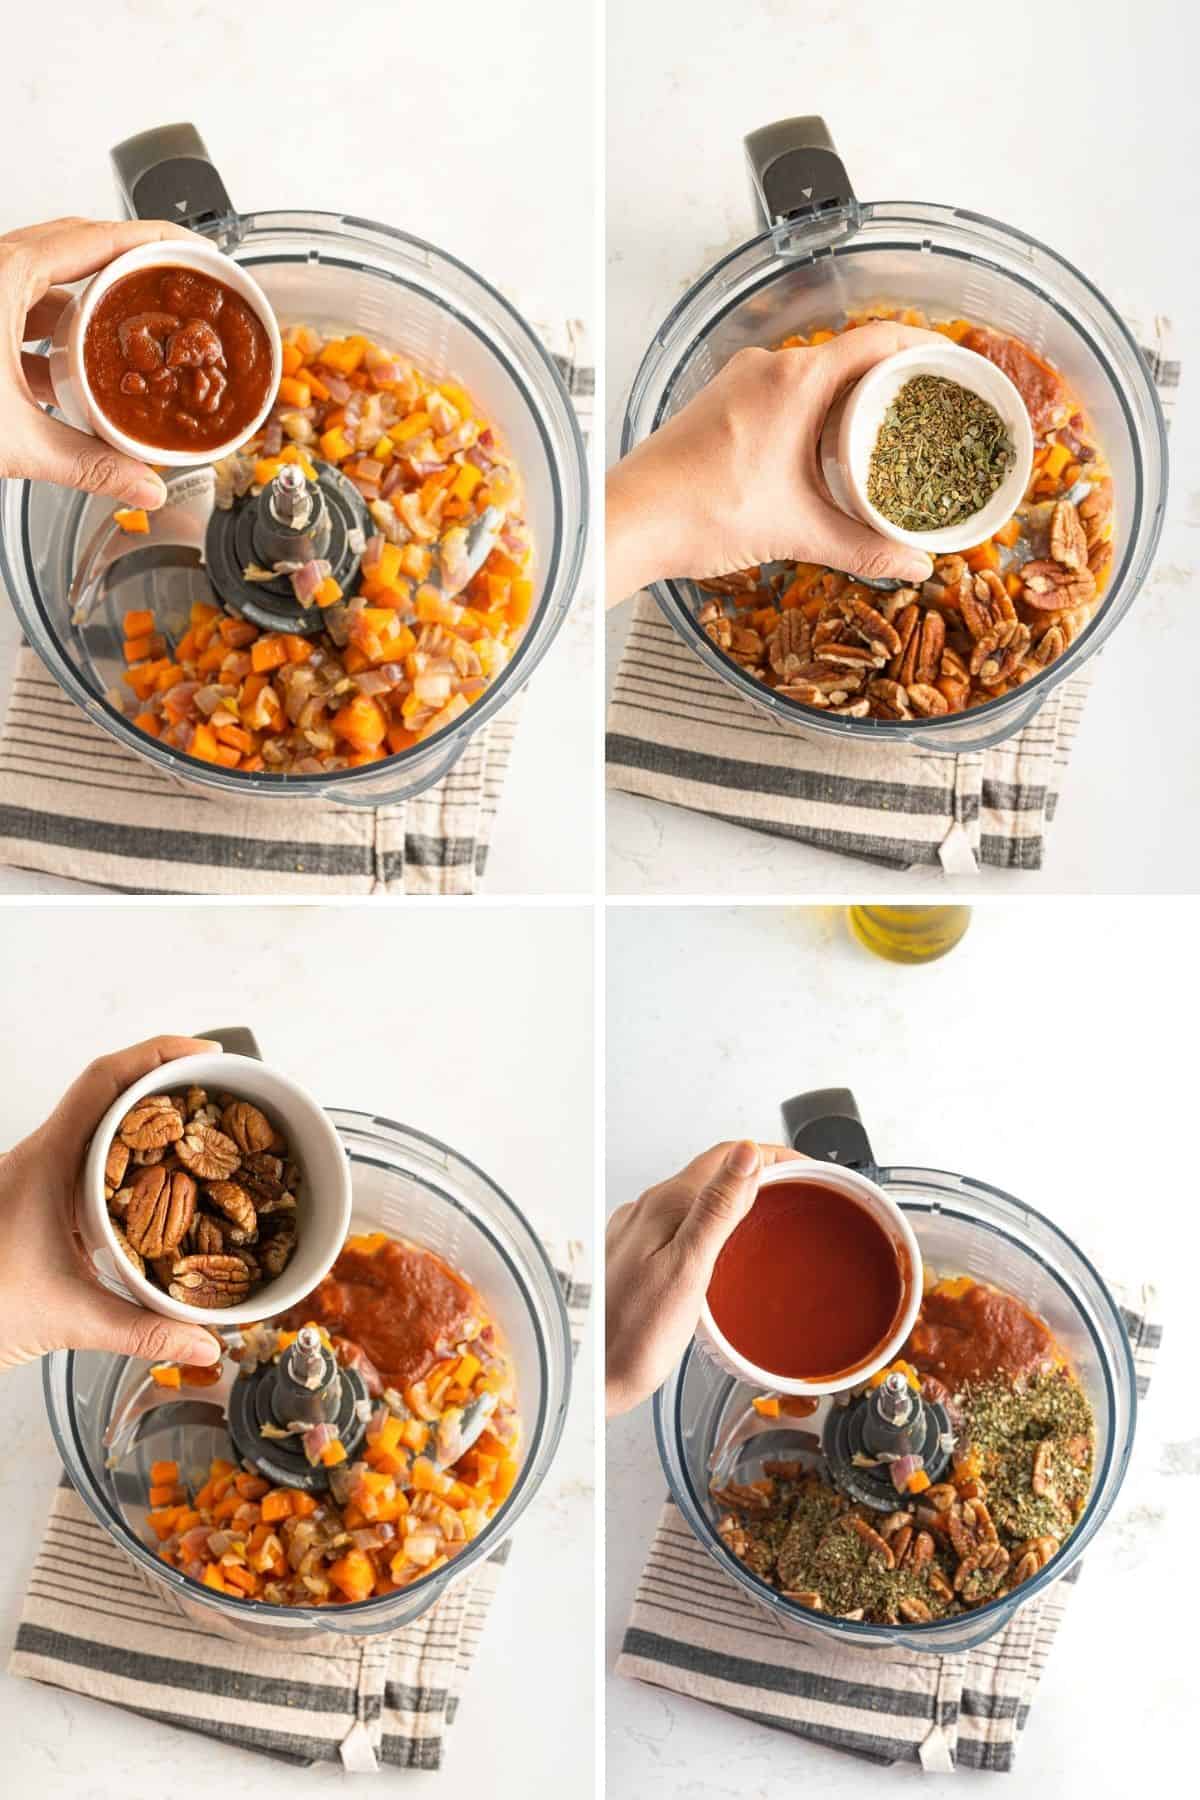 Collage of pictures showing ingredients for vegan loaf in a food processor.